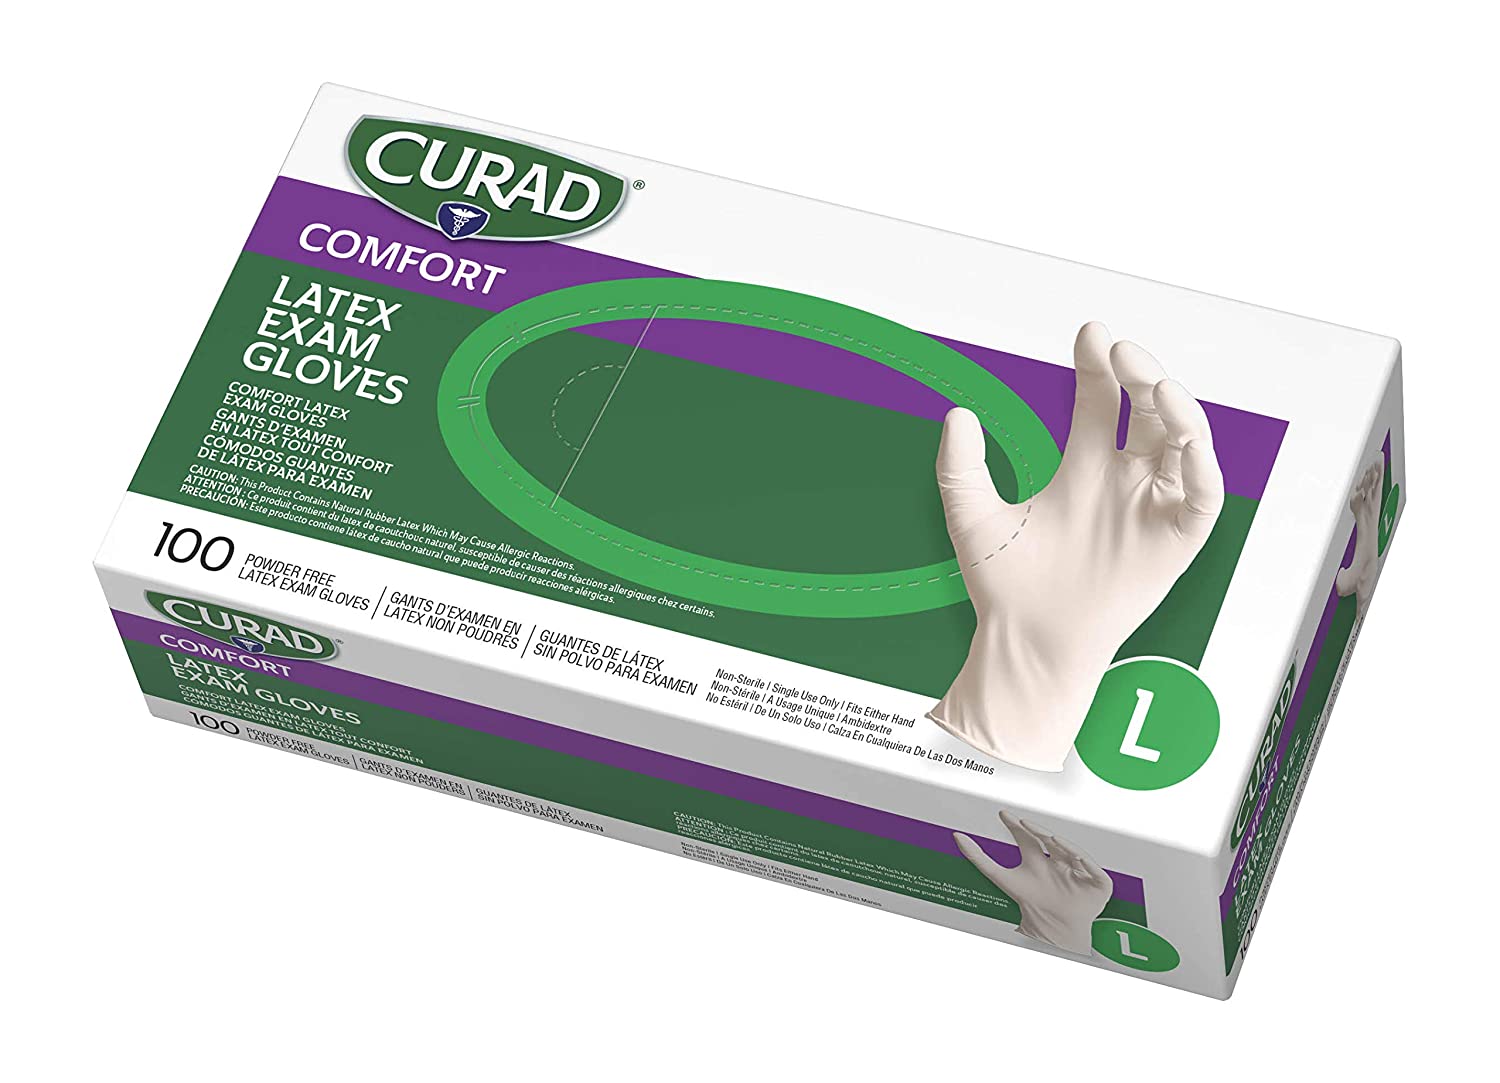 ''Curad Disposable Medical Latex GLOVES, Powder Free Latex GLOVES are Textured, Large, 100 Count''